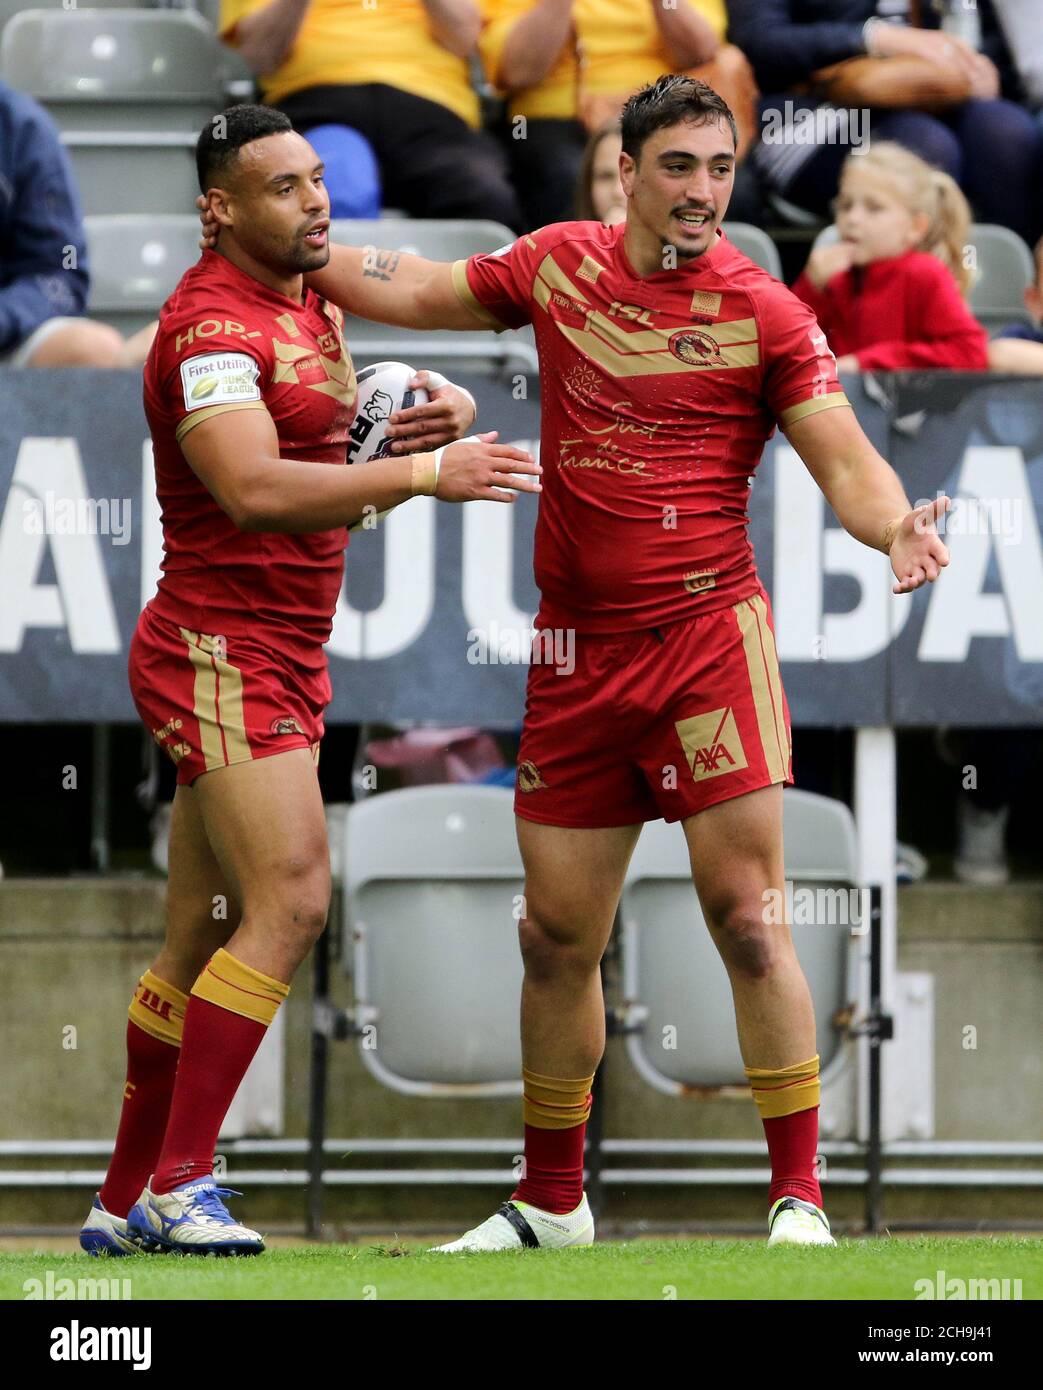 Catalan Dragons' Jodie Broughton (left) celebrates with Catalan Dragons' Tony Gigot during the Dacia Magic Weekend match at St James' Park, Newcastle. Stock Photo